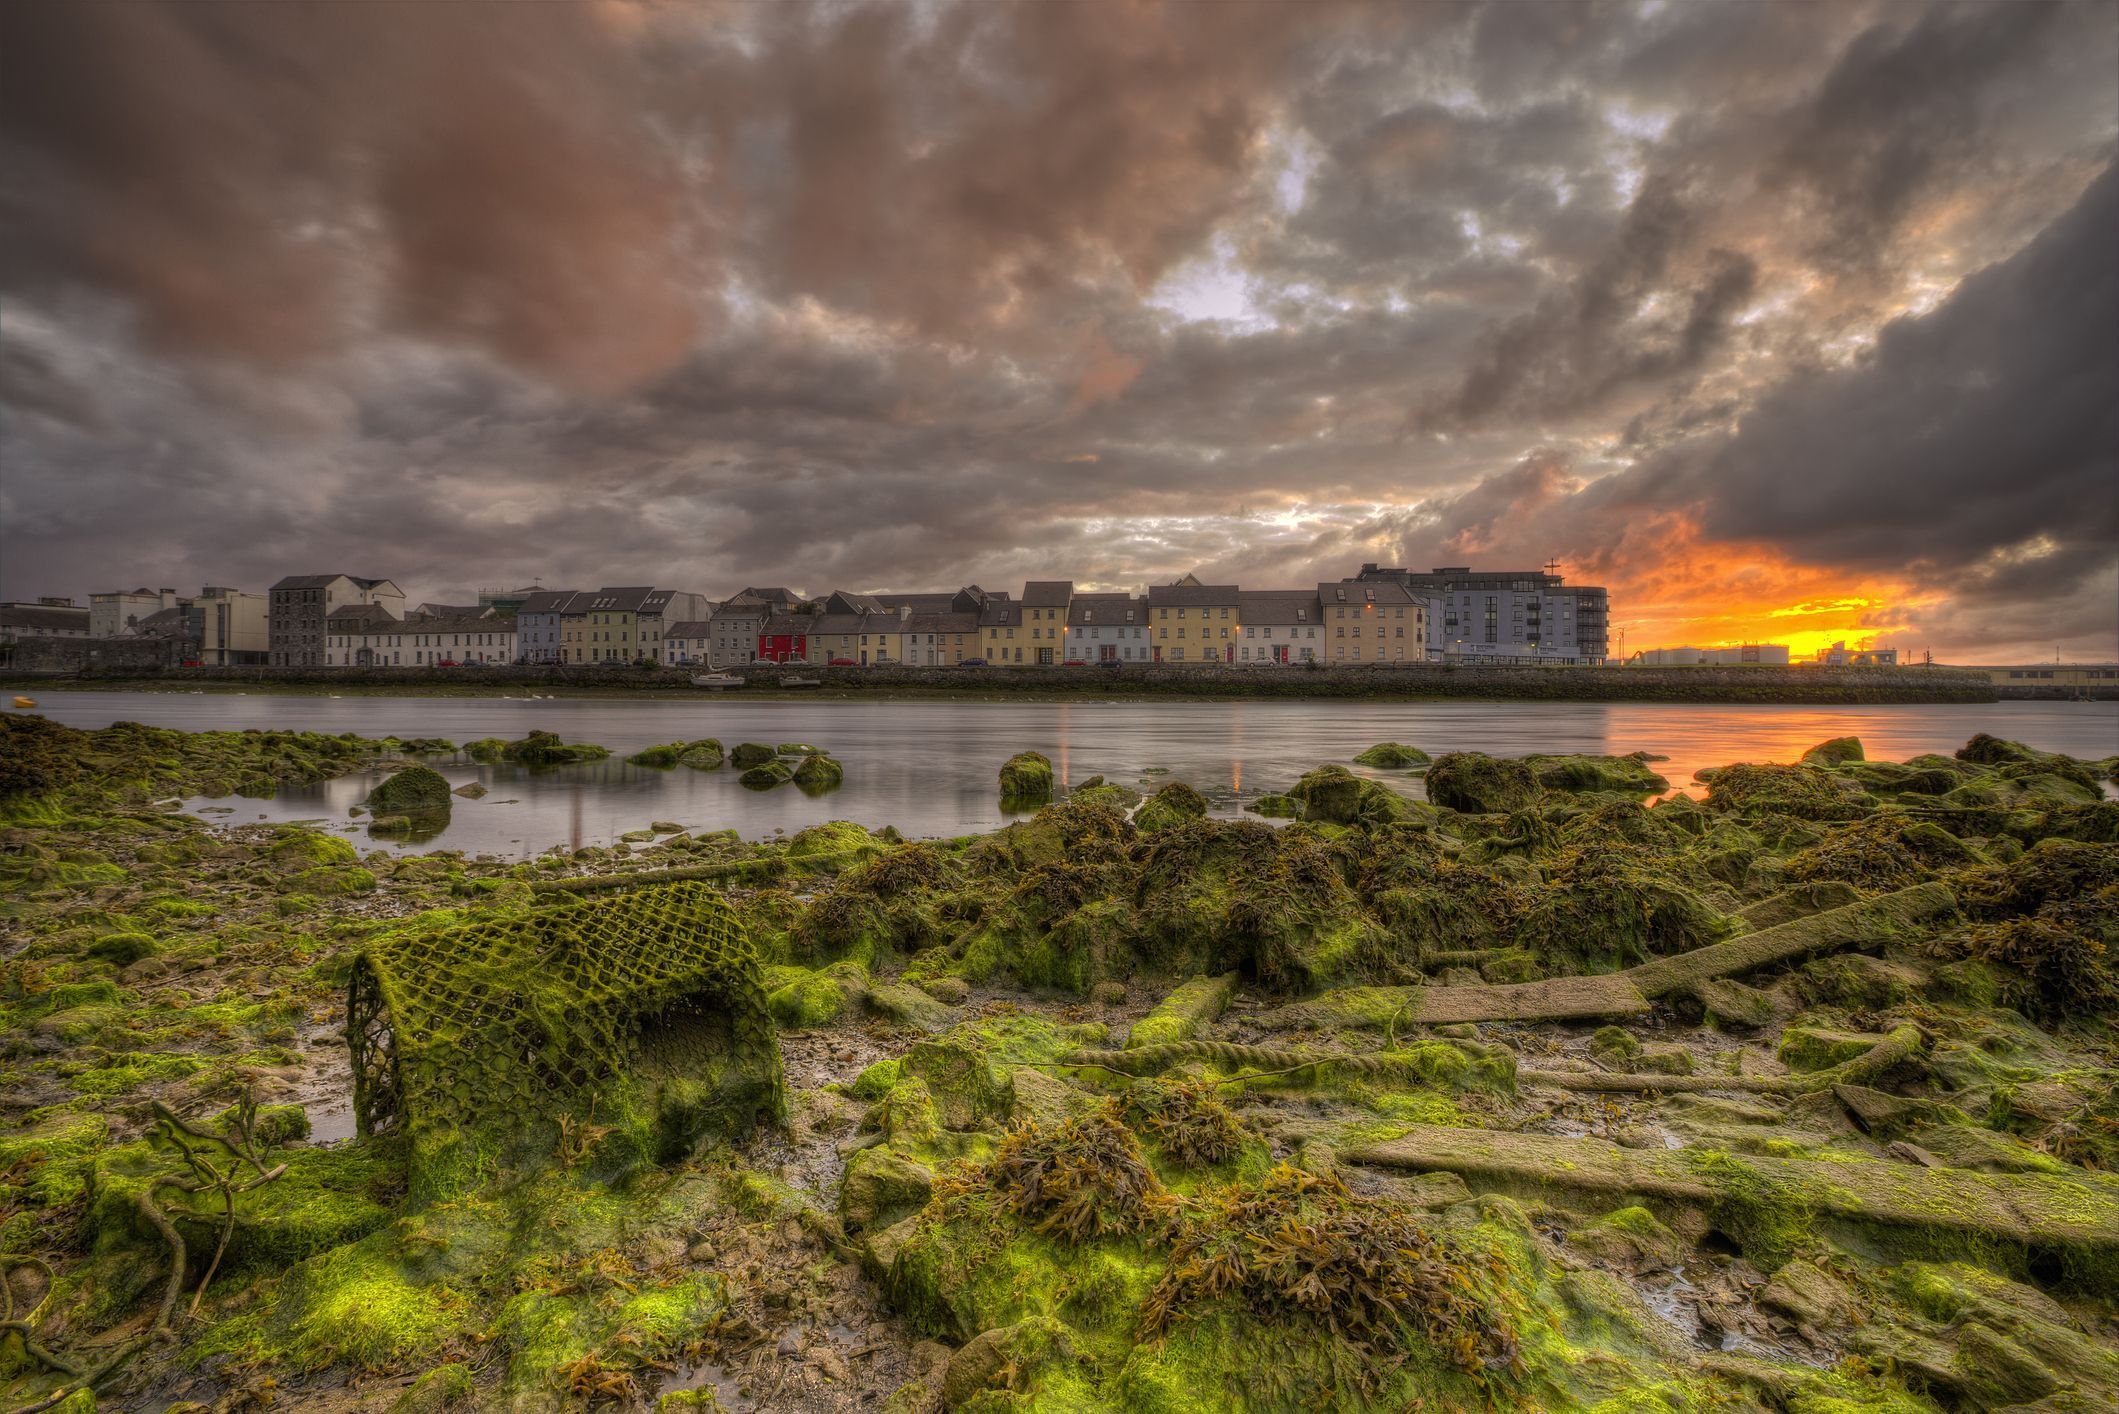 The Top Five Most Instagram-able Spots in County Galway